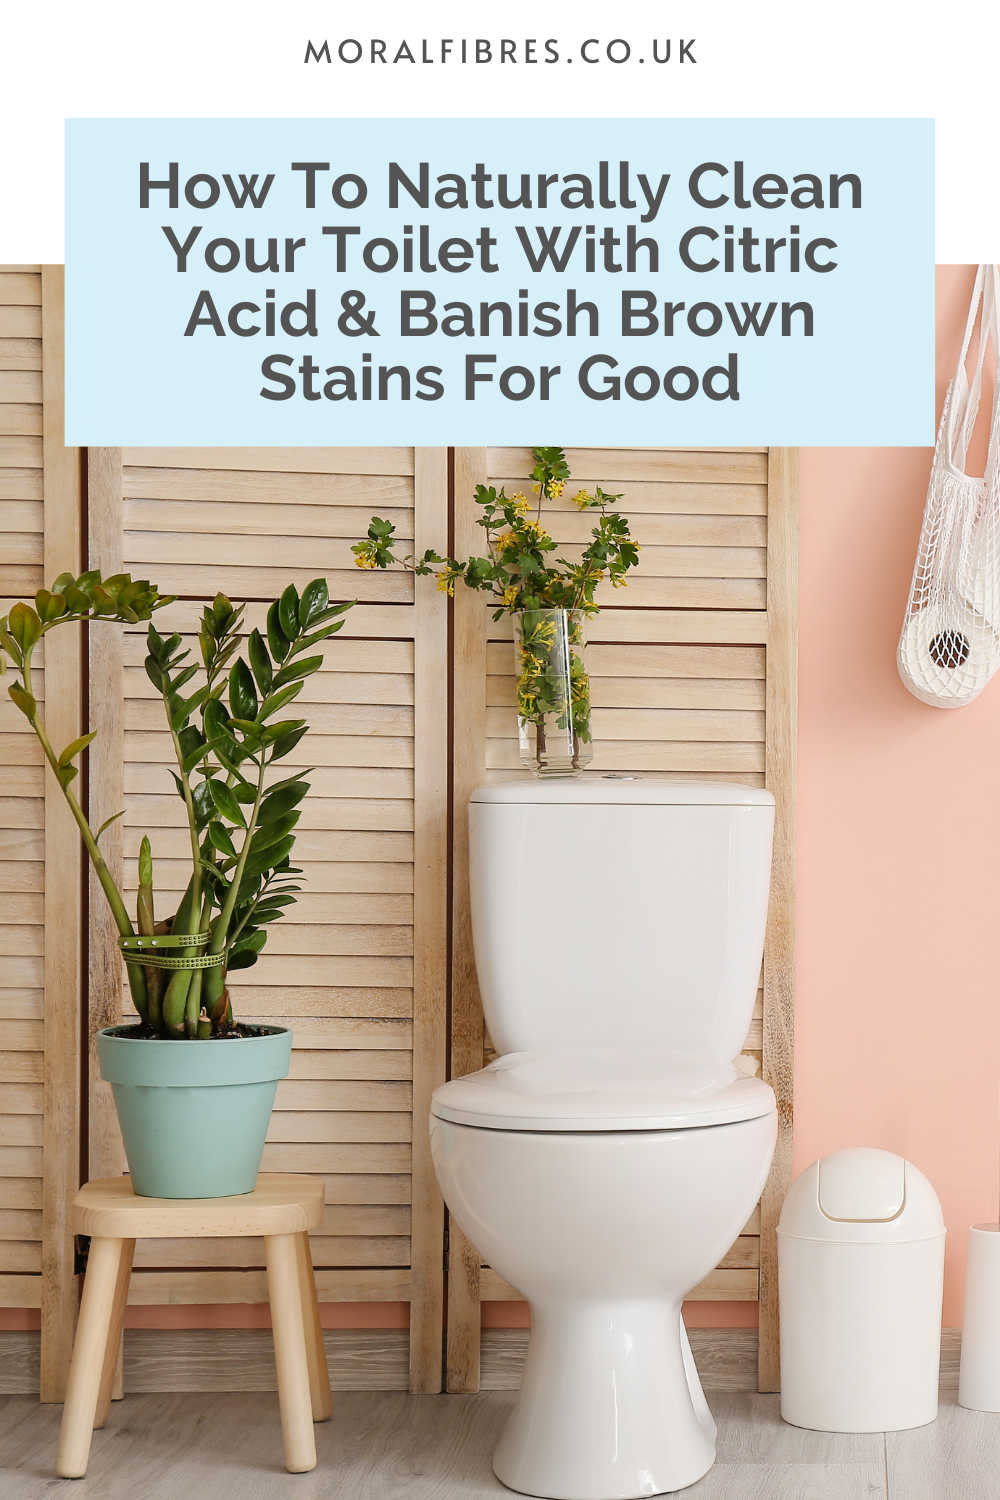 A white toilet with a plant next to it, with a blue text box that reads how to naturally clean your toilet with citric acid and banish brown stains for good.